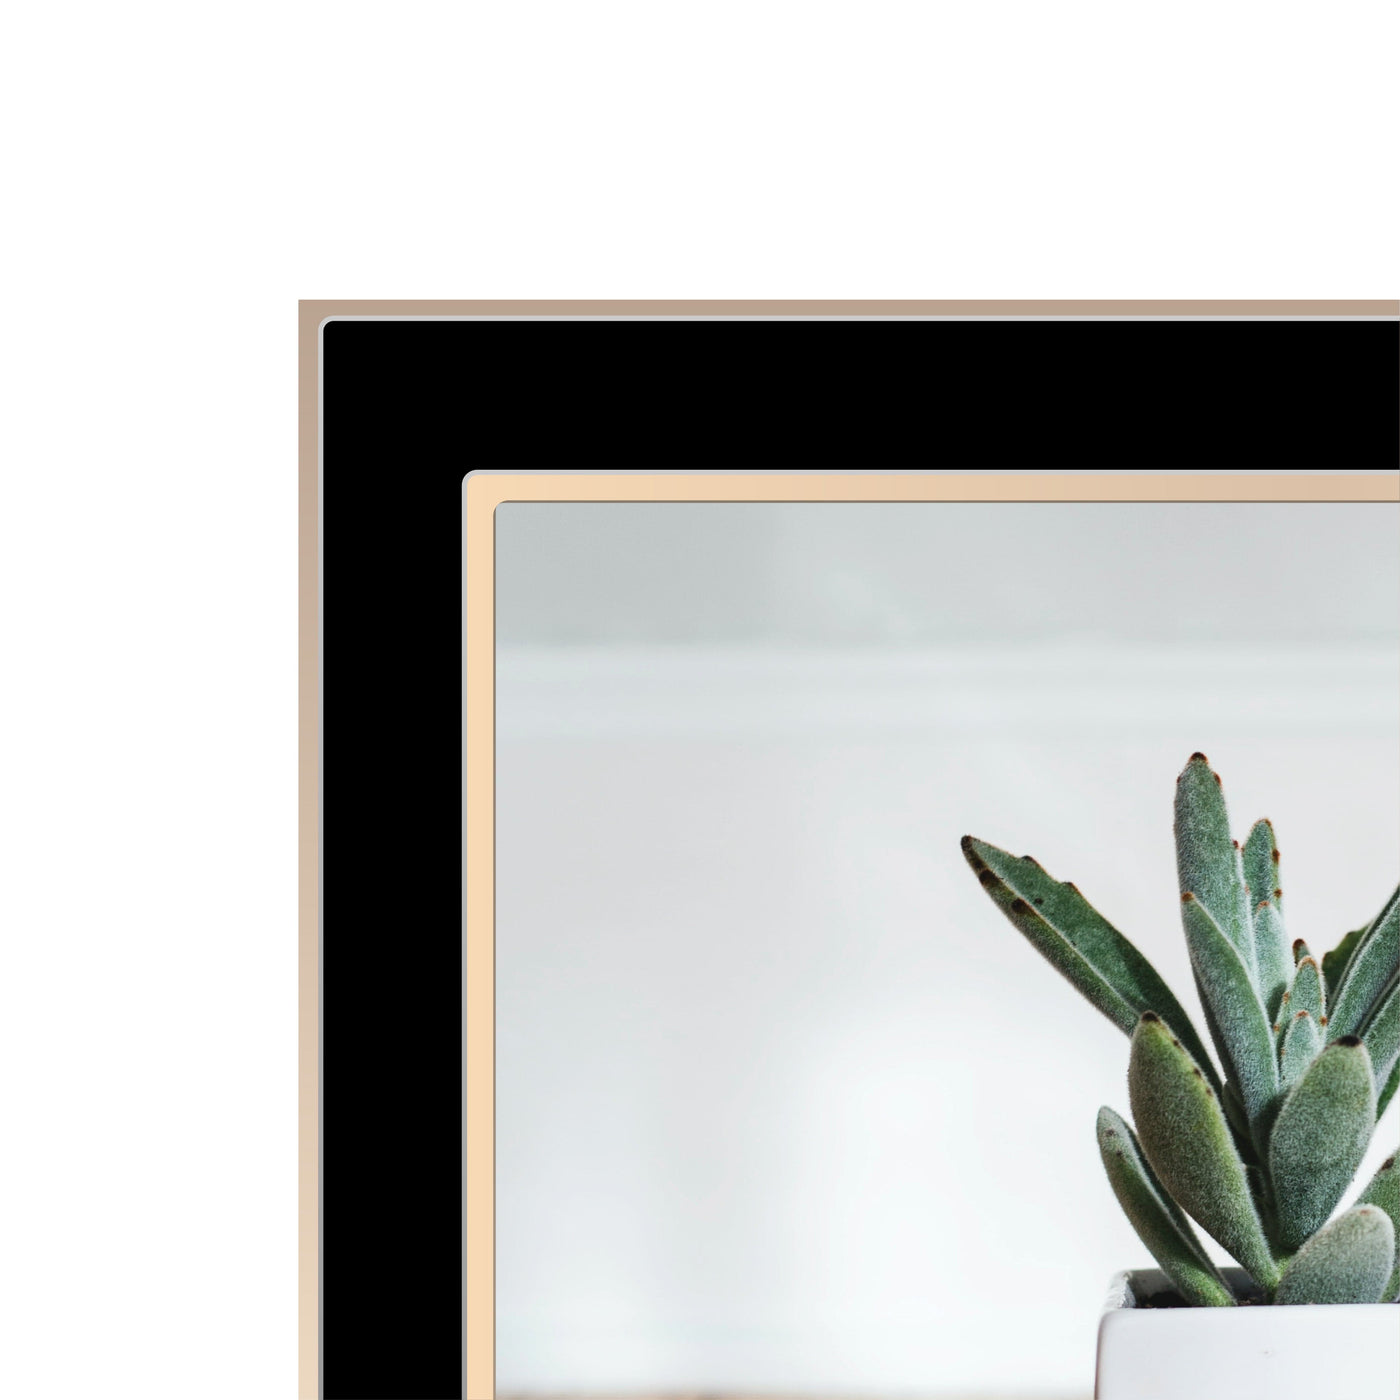 Eternal Black/Rose Gold Metal Collage Three Photo Frame from our Metal Photo Frames collection by Profile Products Australia